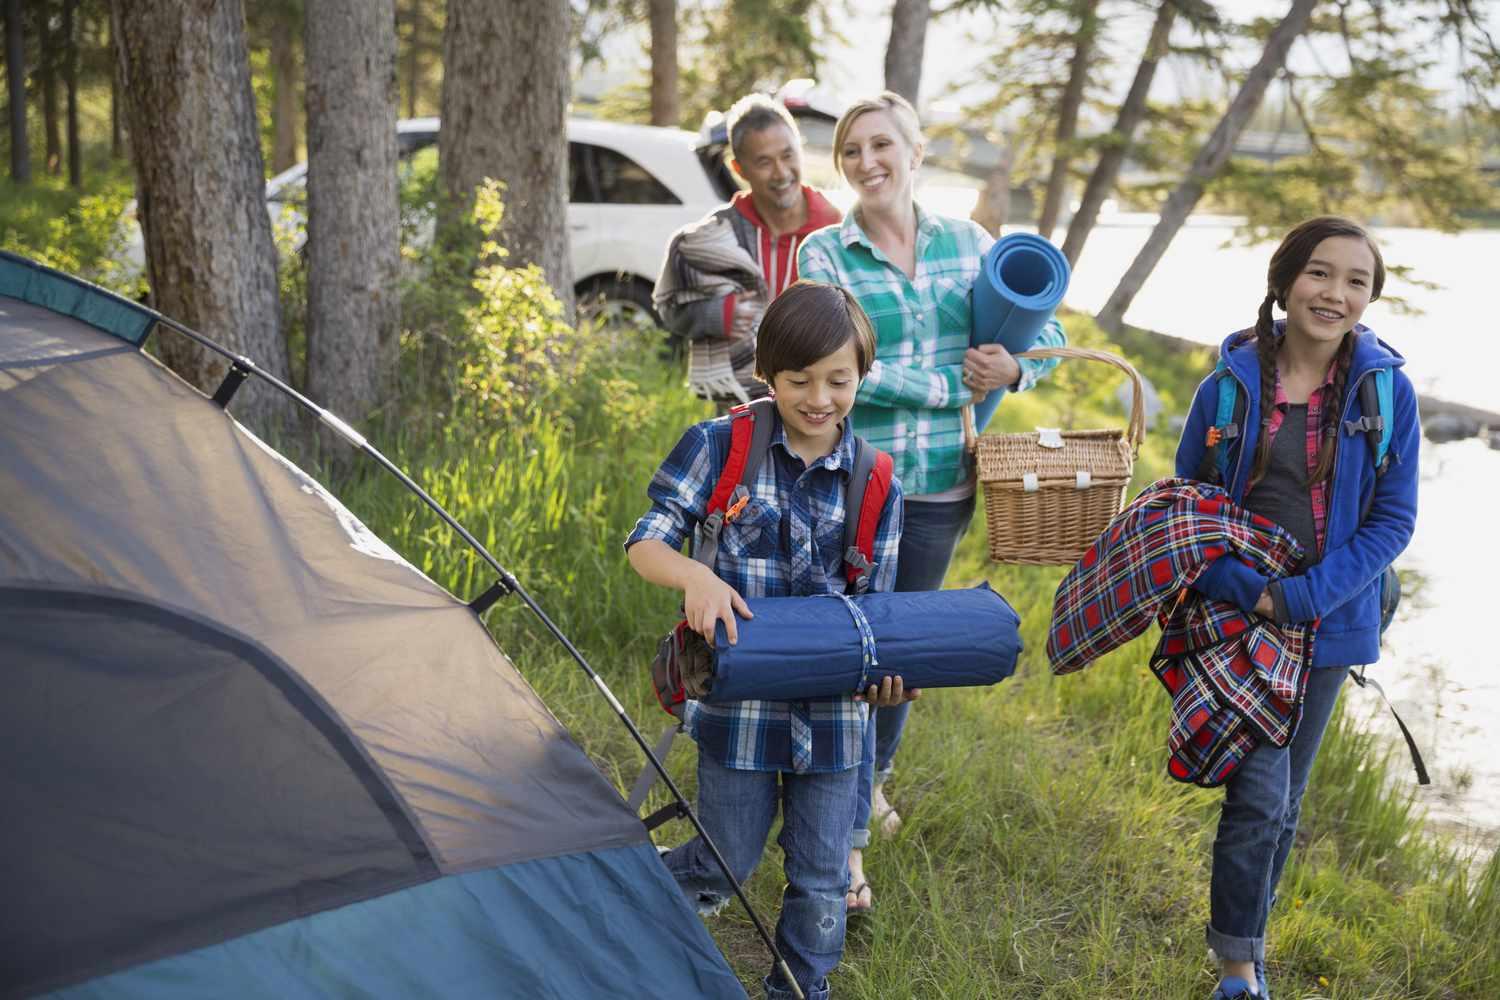 How to Plan a Successful Family Camping Trip